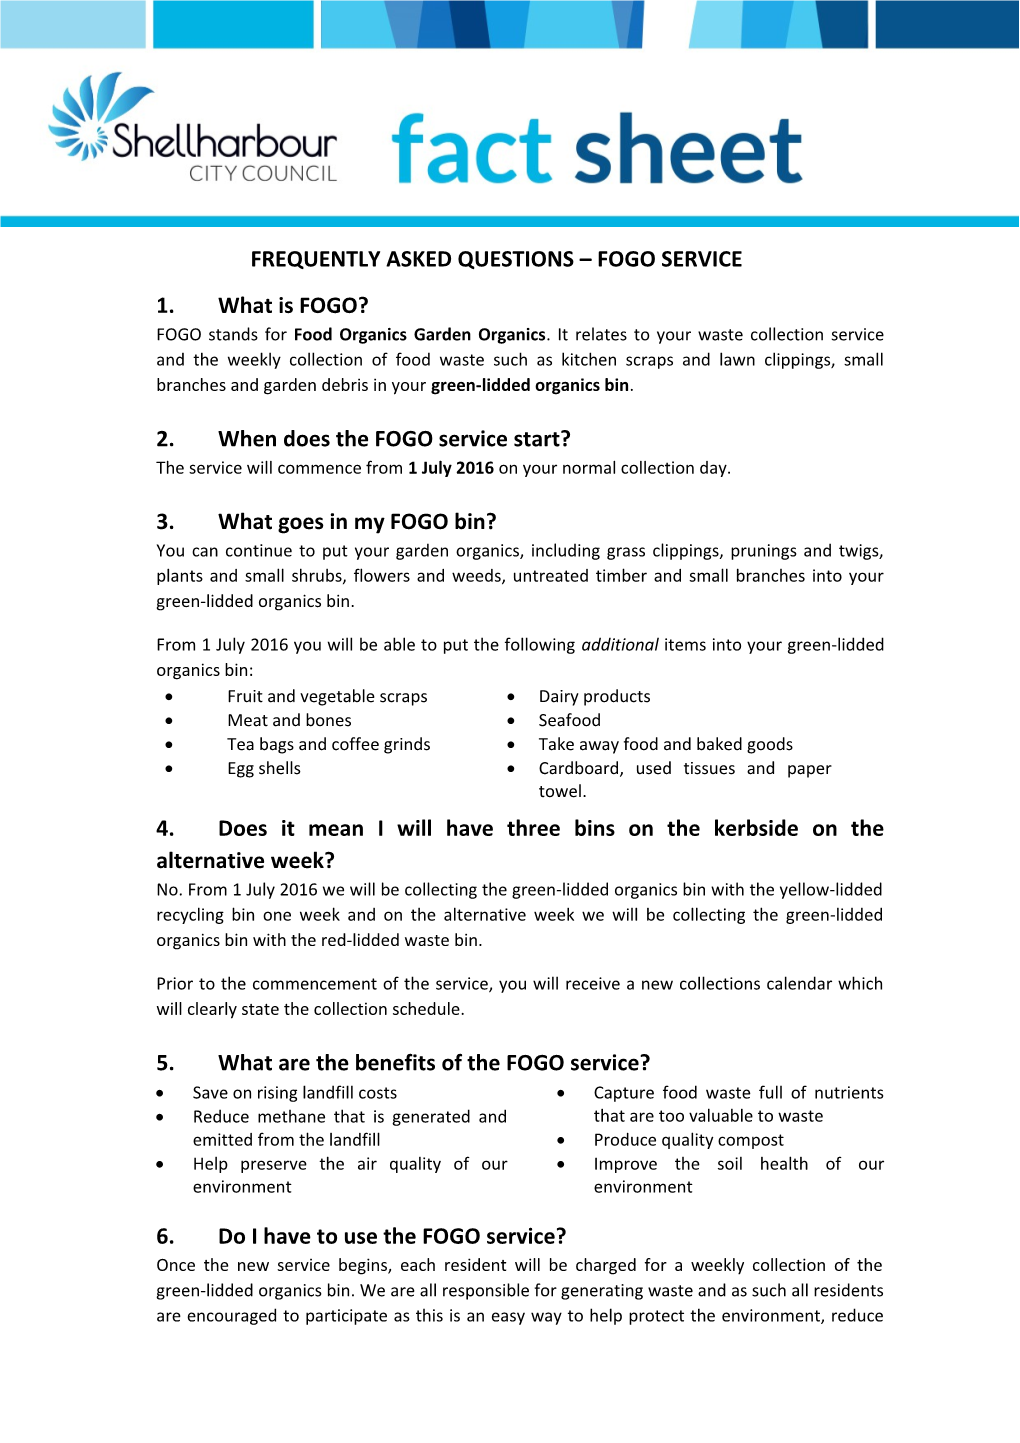 Frequently Asked Questions Fogo Service